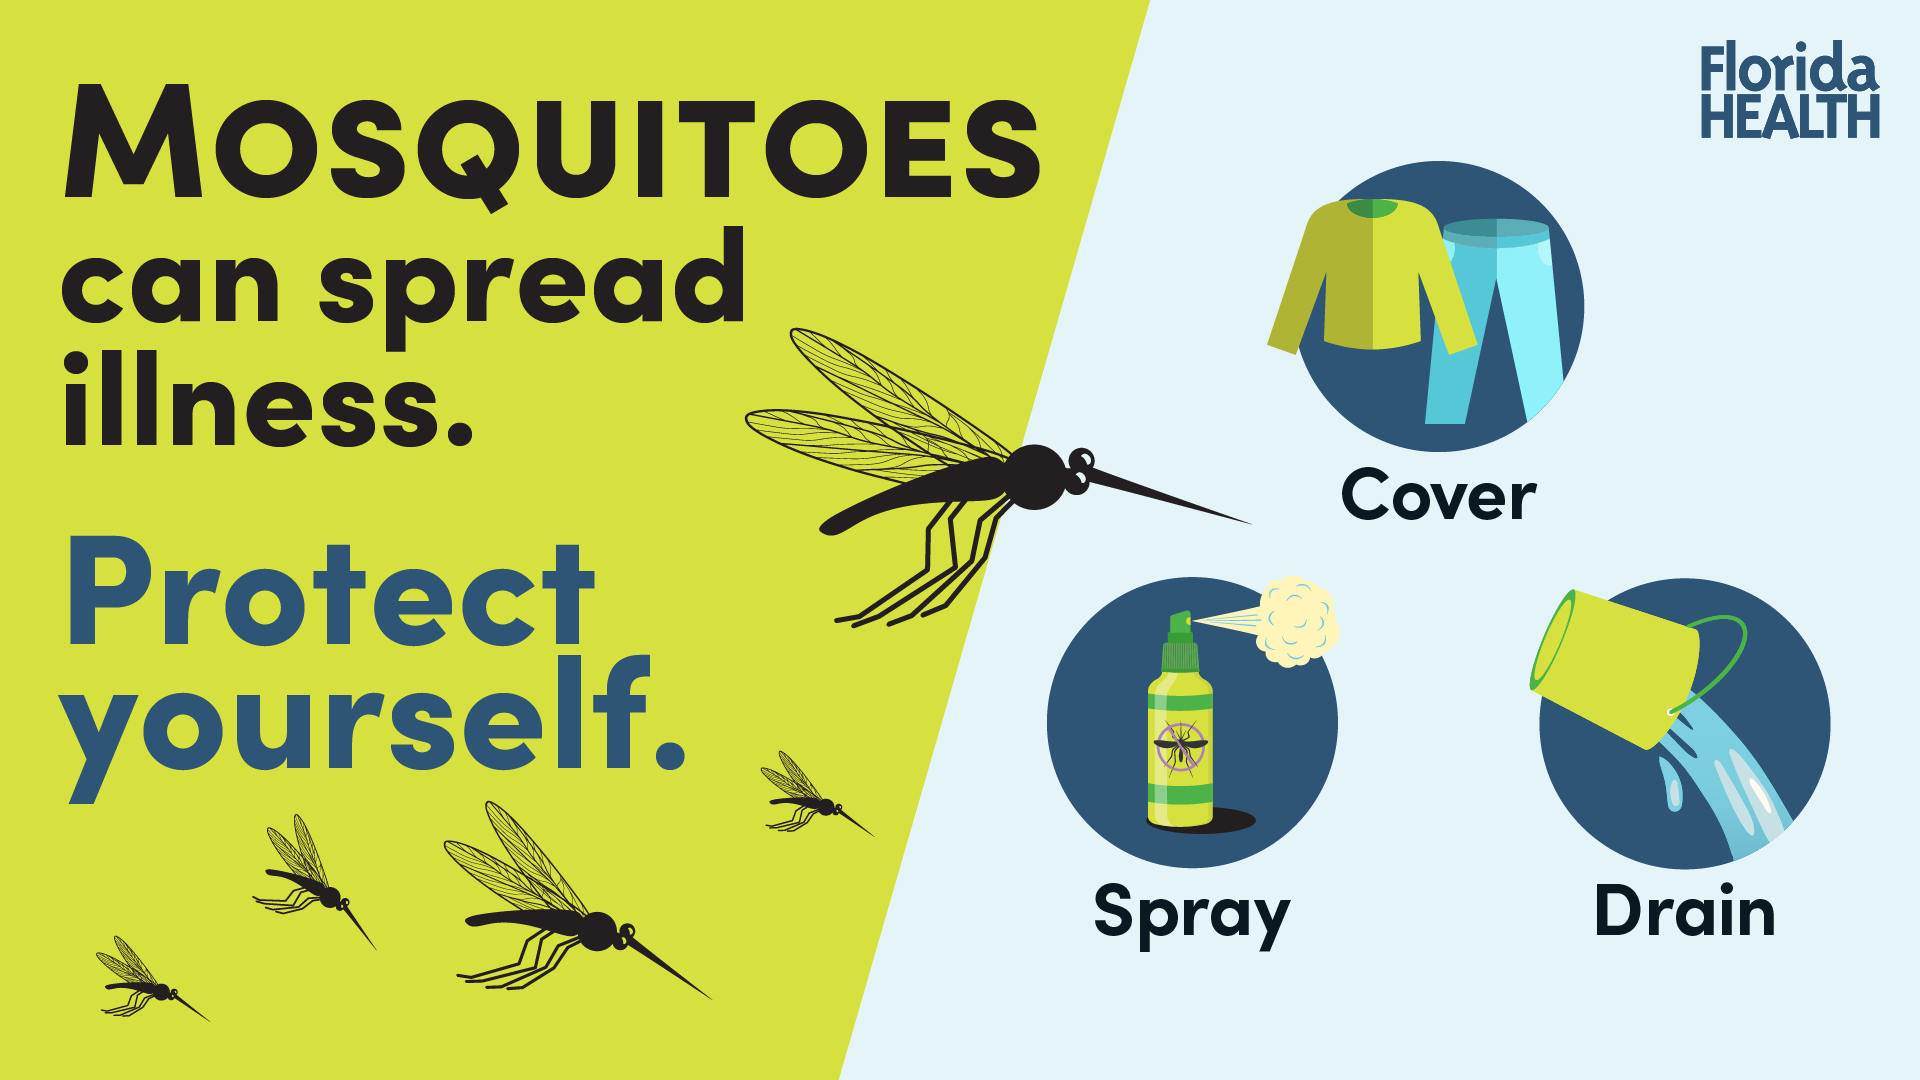 Mosquitoes can spread illness.